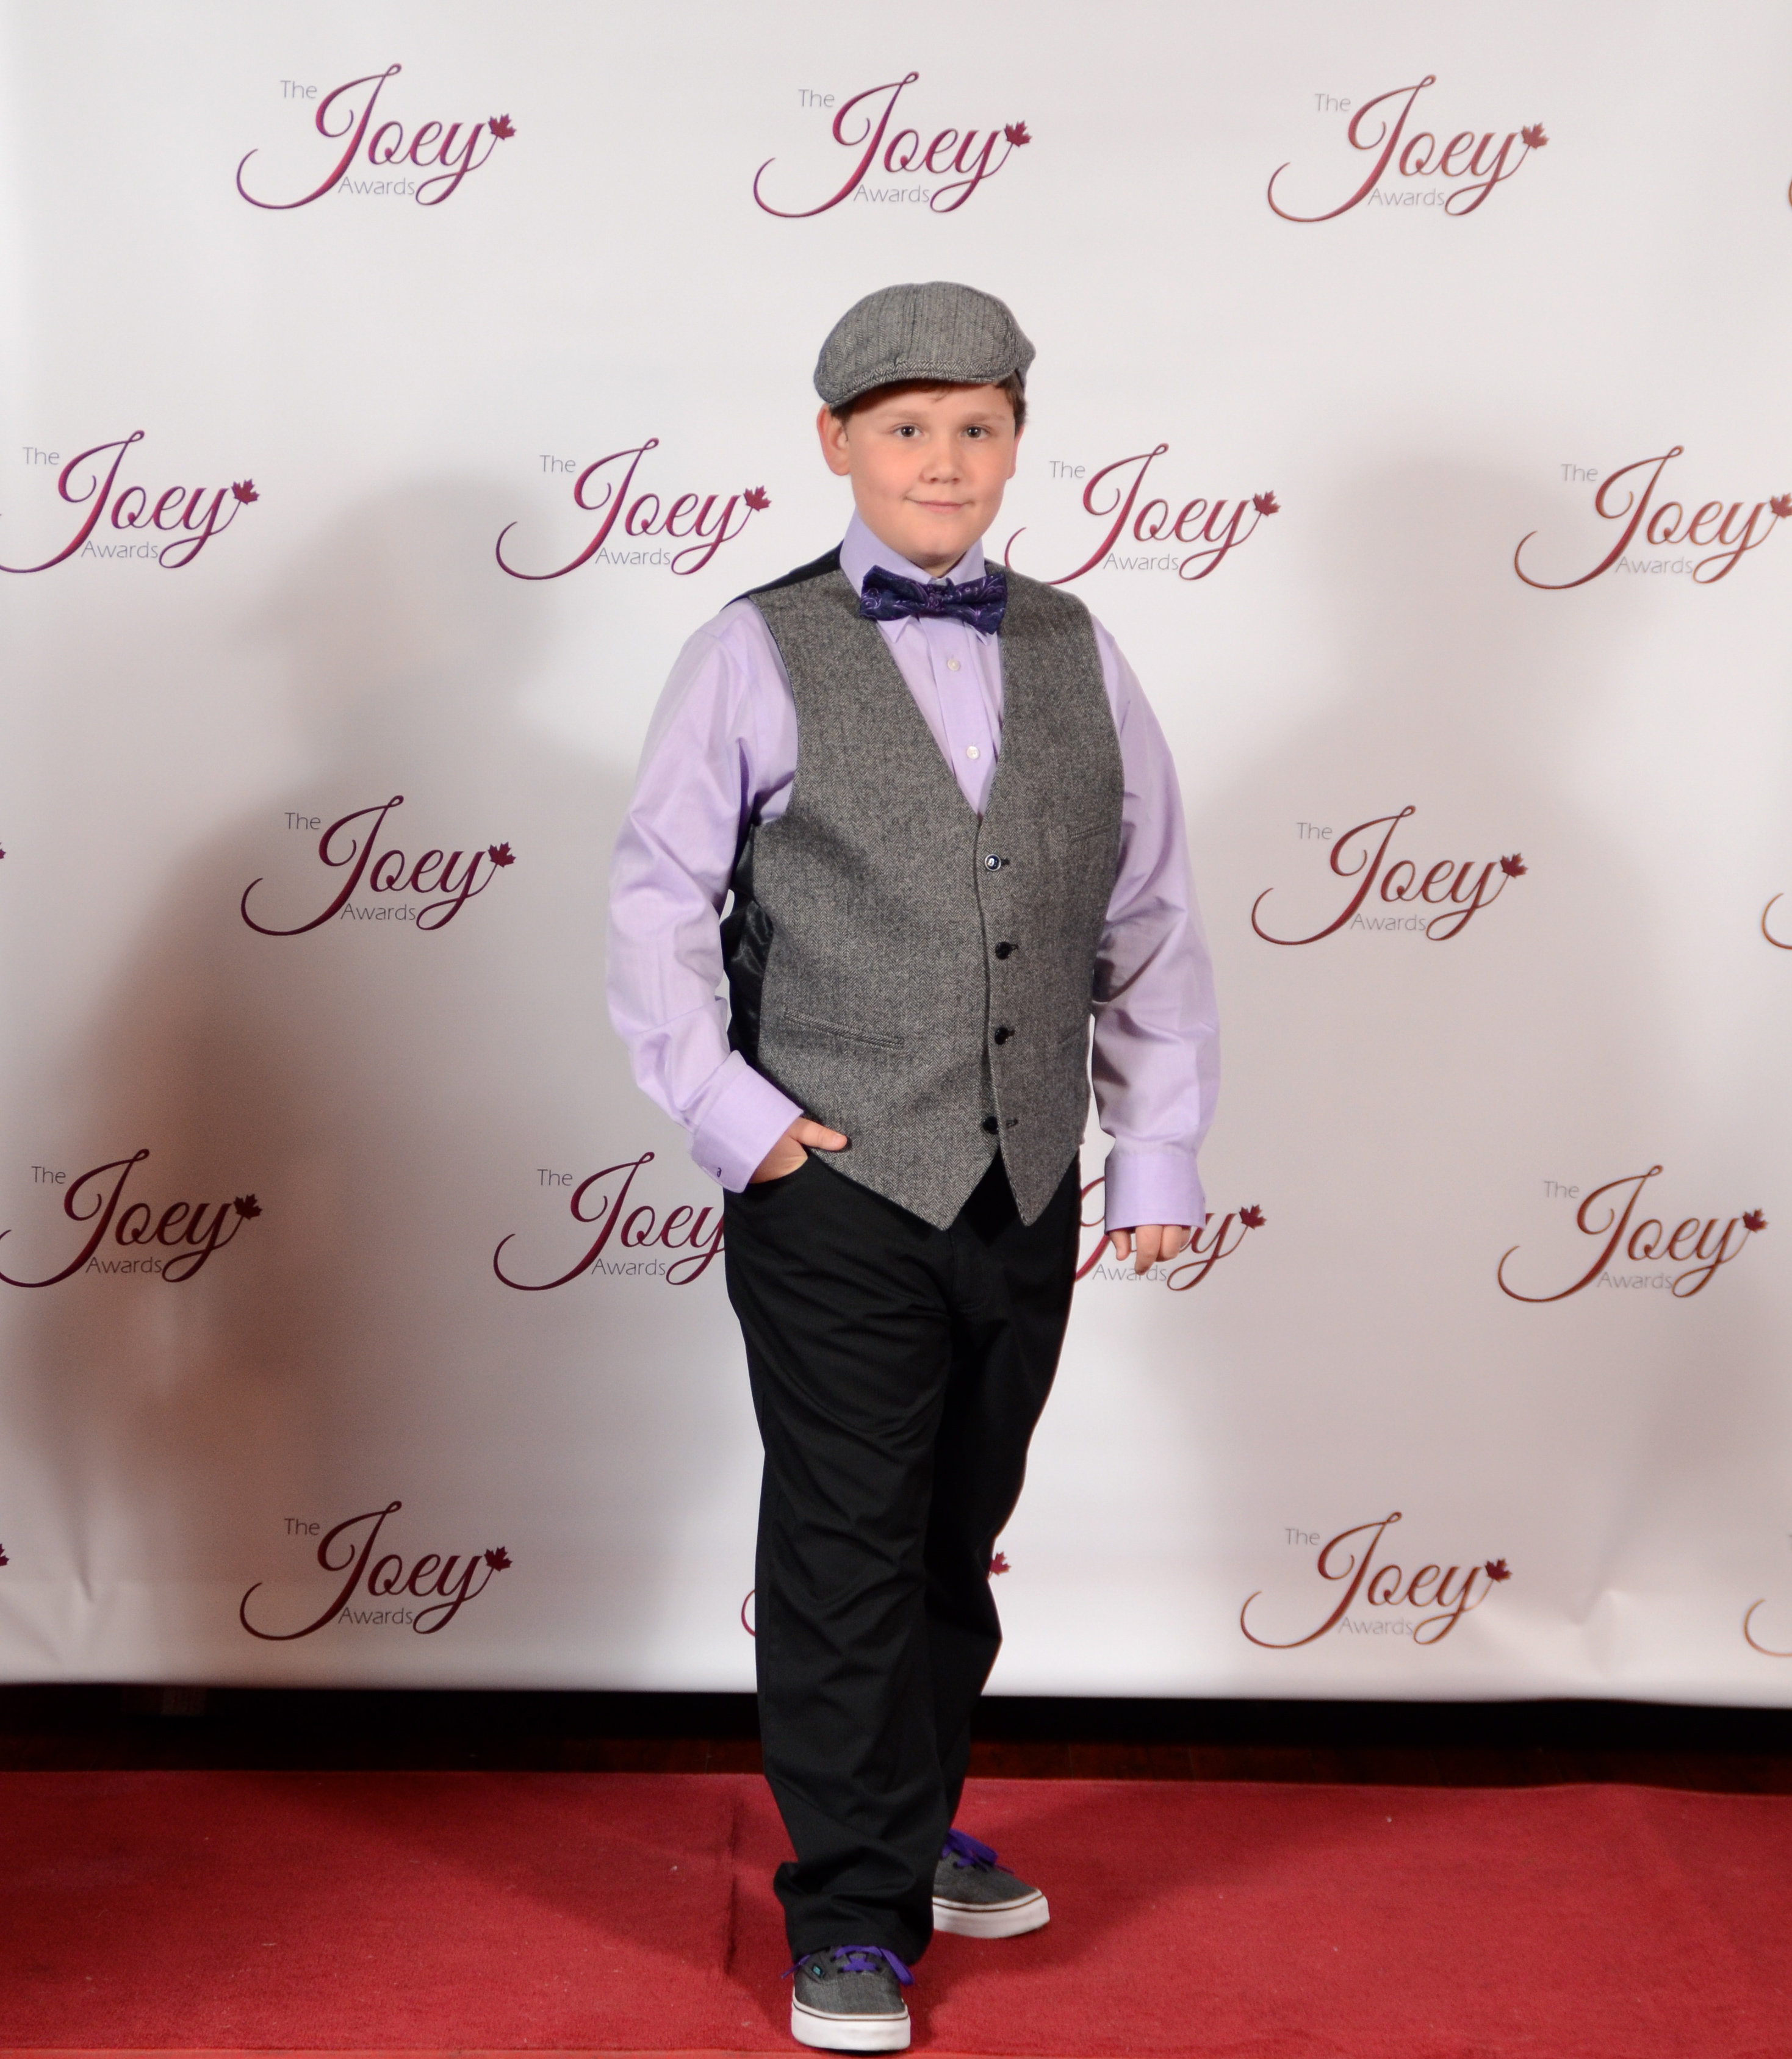 CJ on the red carpet of the 2014 Joey Awards in Vancouver